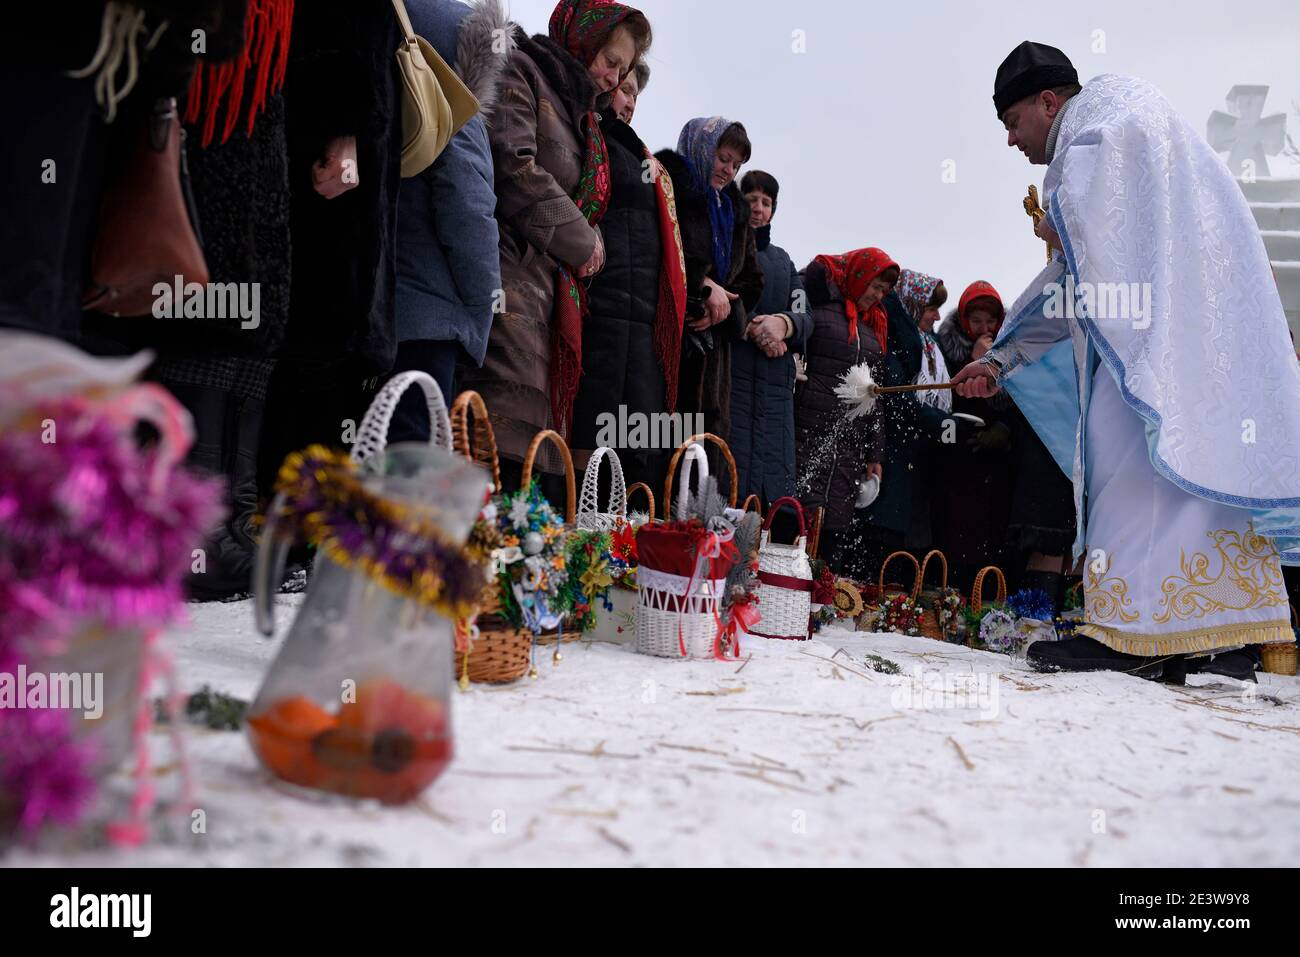 Non Exclusive: YAVORIV, UKRAINE - JANUARY 19, 2021 - A priest blesses the basket with the bottles of water during the Epiphany liturgy, Yavoriv villag Stock Photo